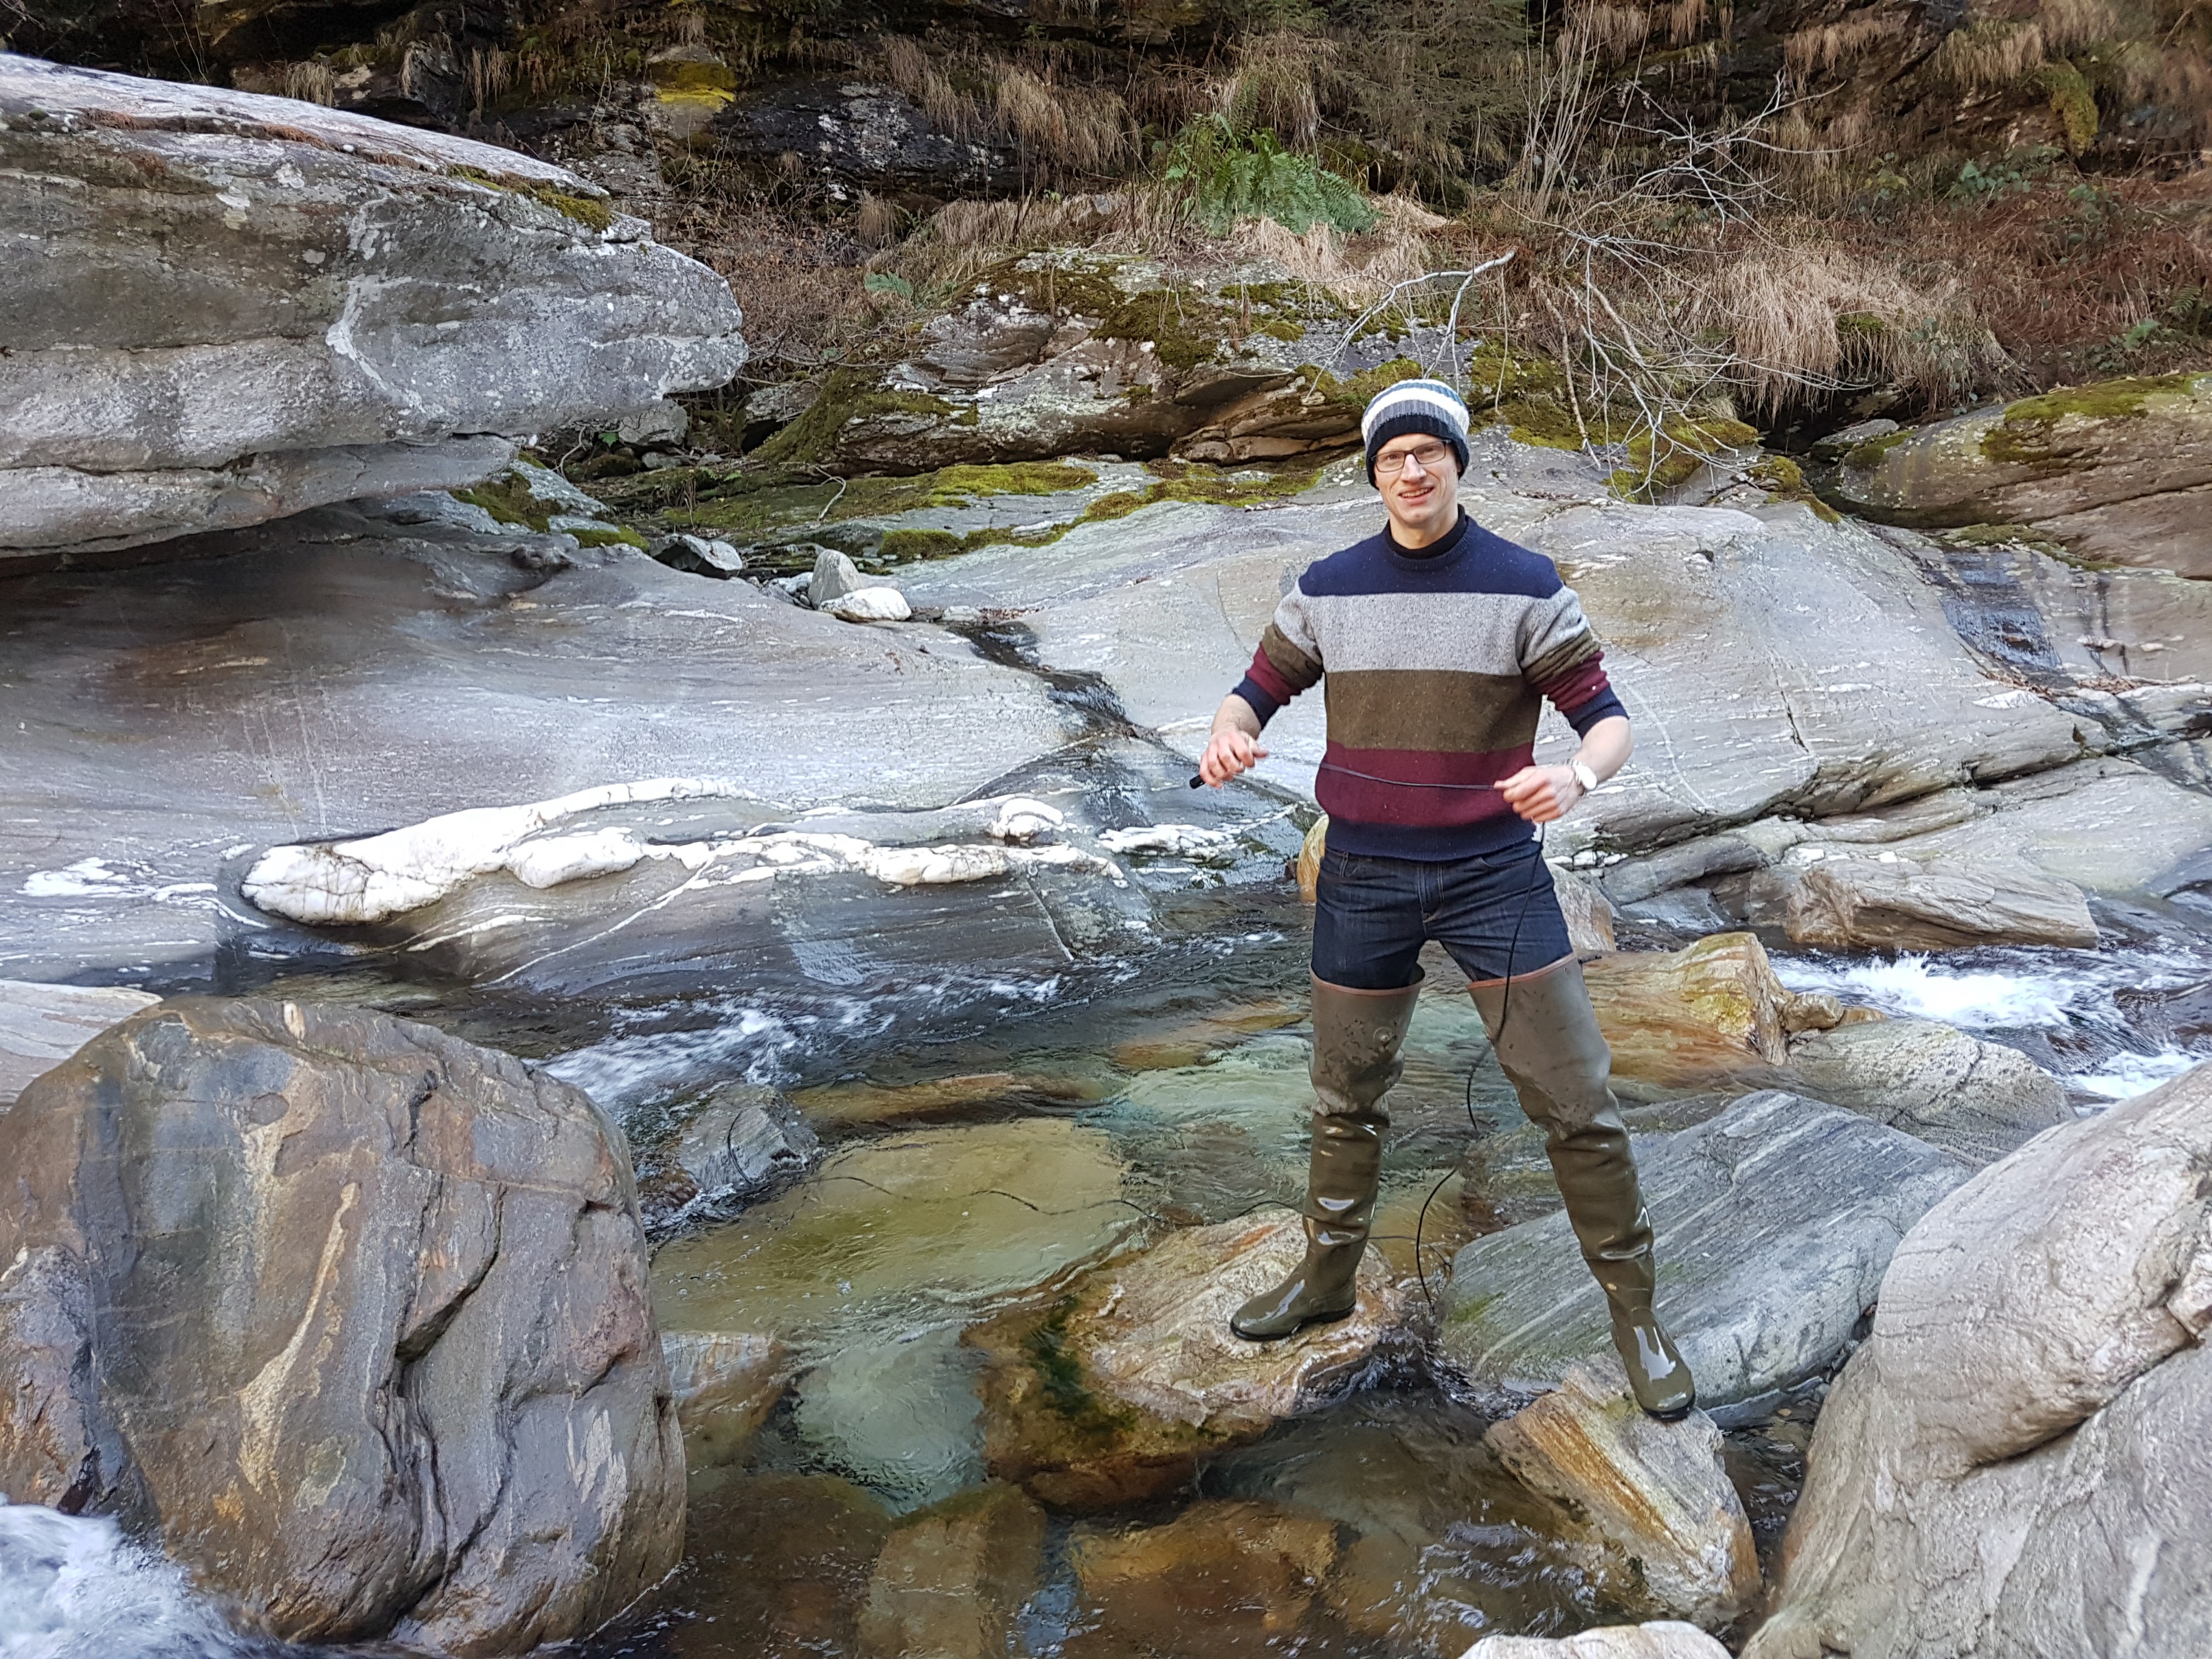 Pierre-Jacques Frank, specialist engineer in Environment/Water Management, performing a discharge measurement using a salt refraction method on the Calancasca River in his fishing boots.